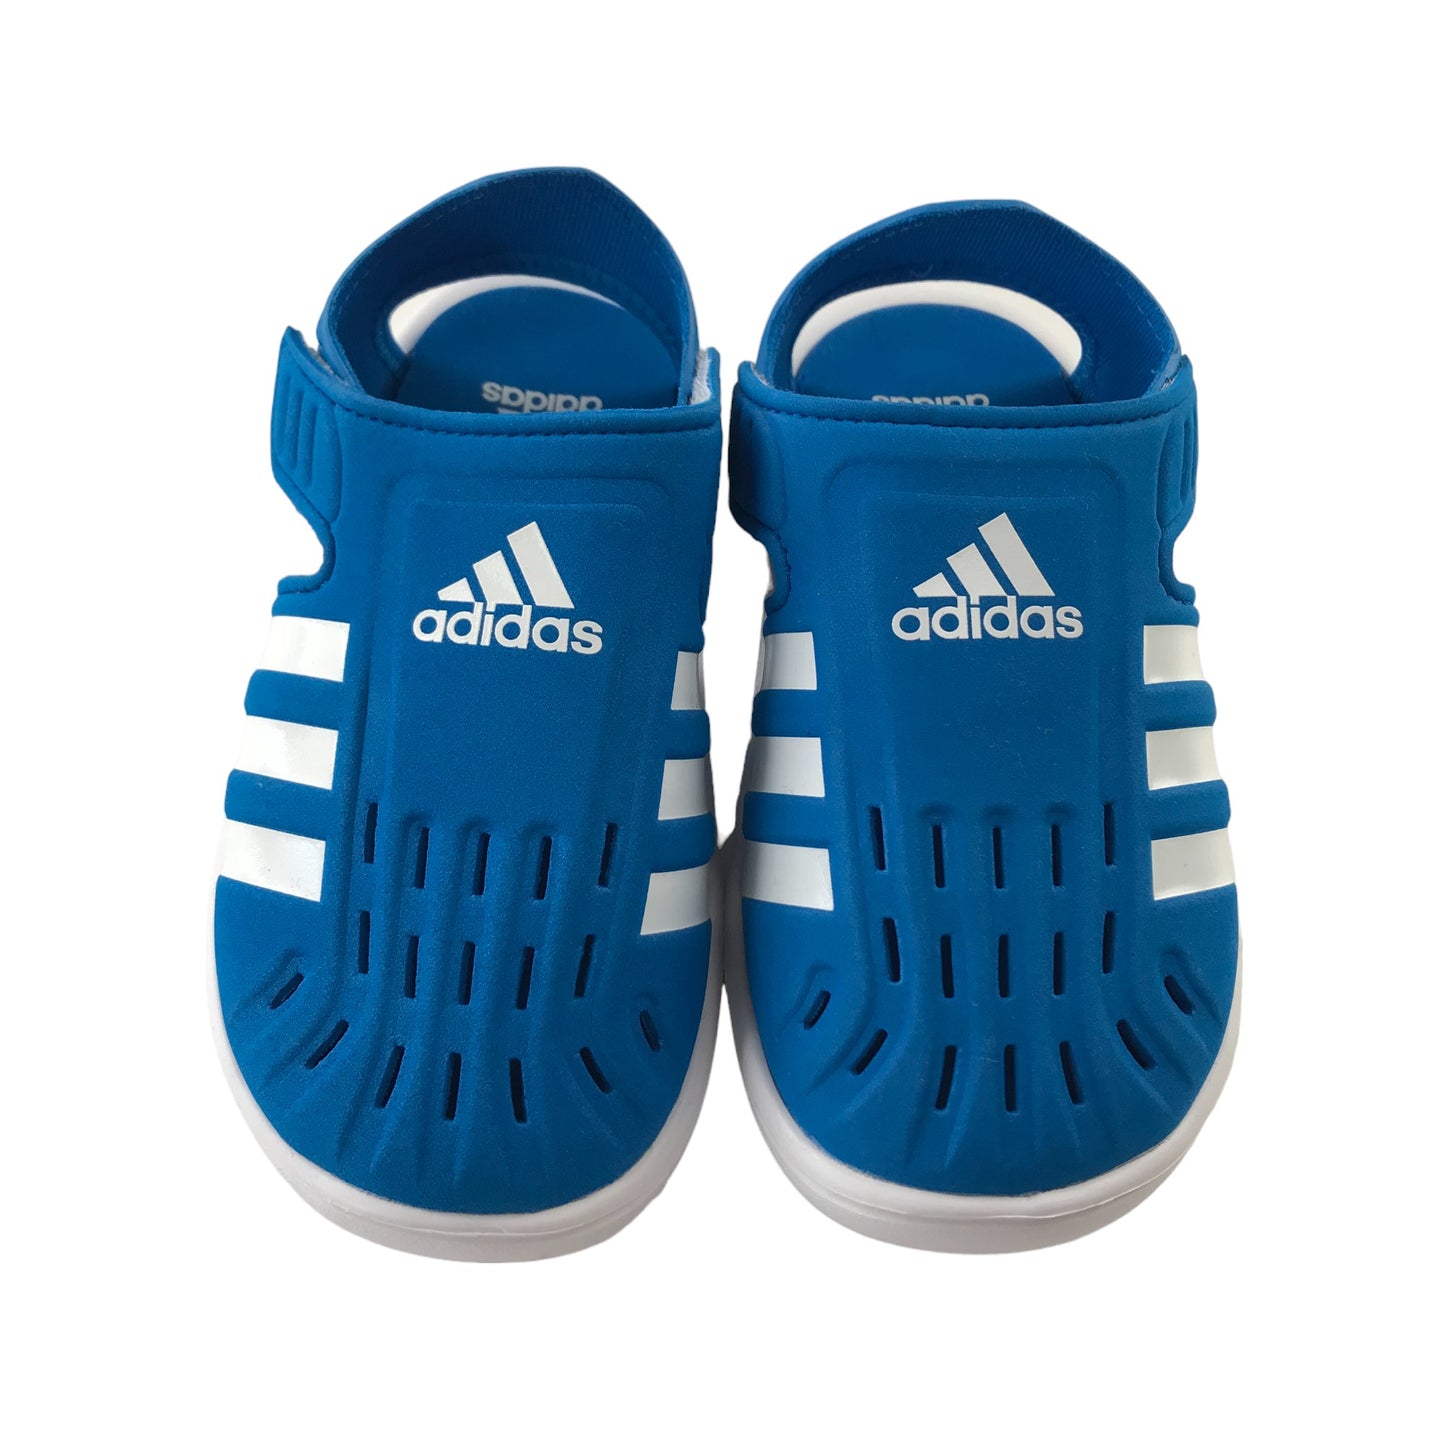 Adidas Sandals Shoe Size 11 Junior Blue and White with Ankle Straps